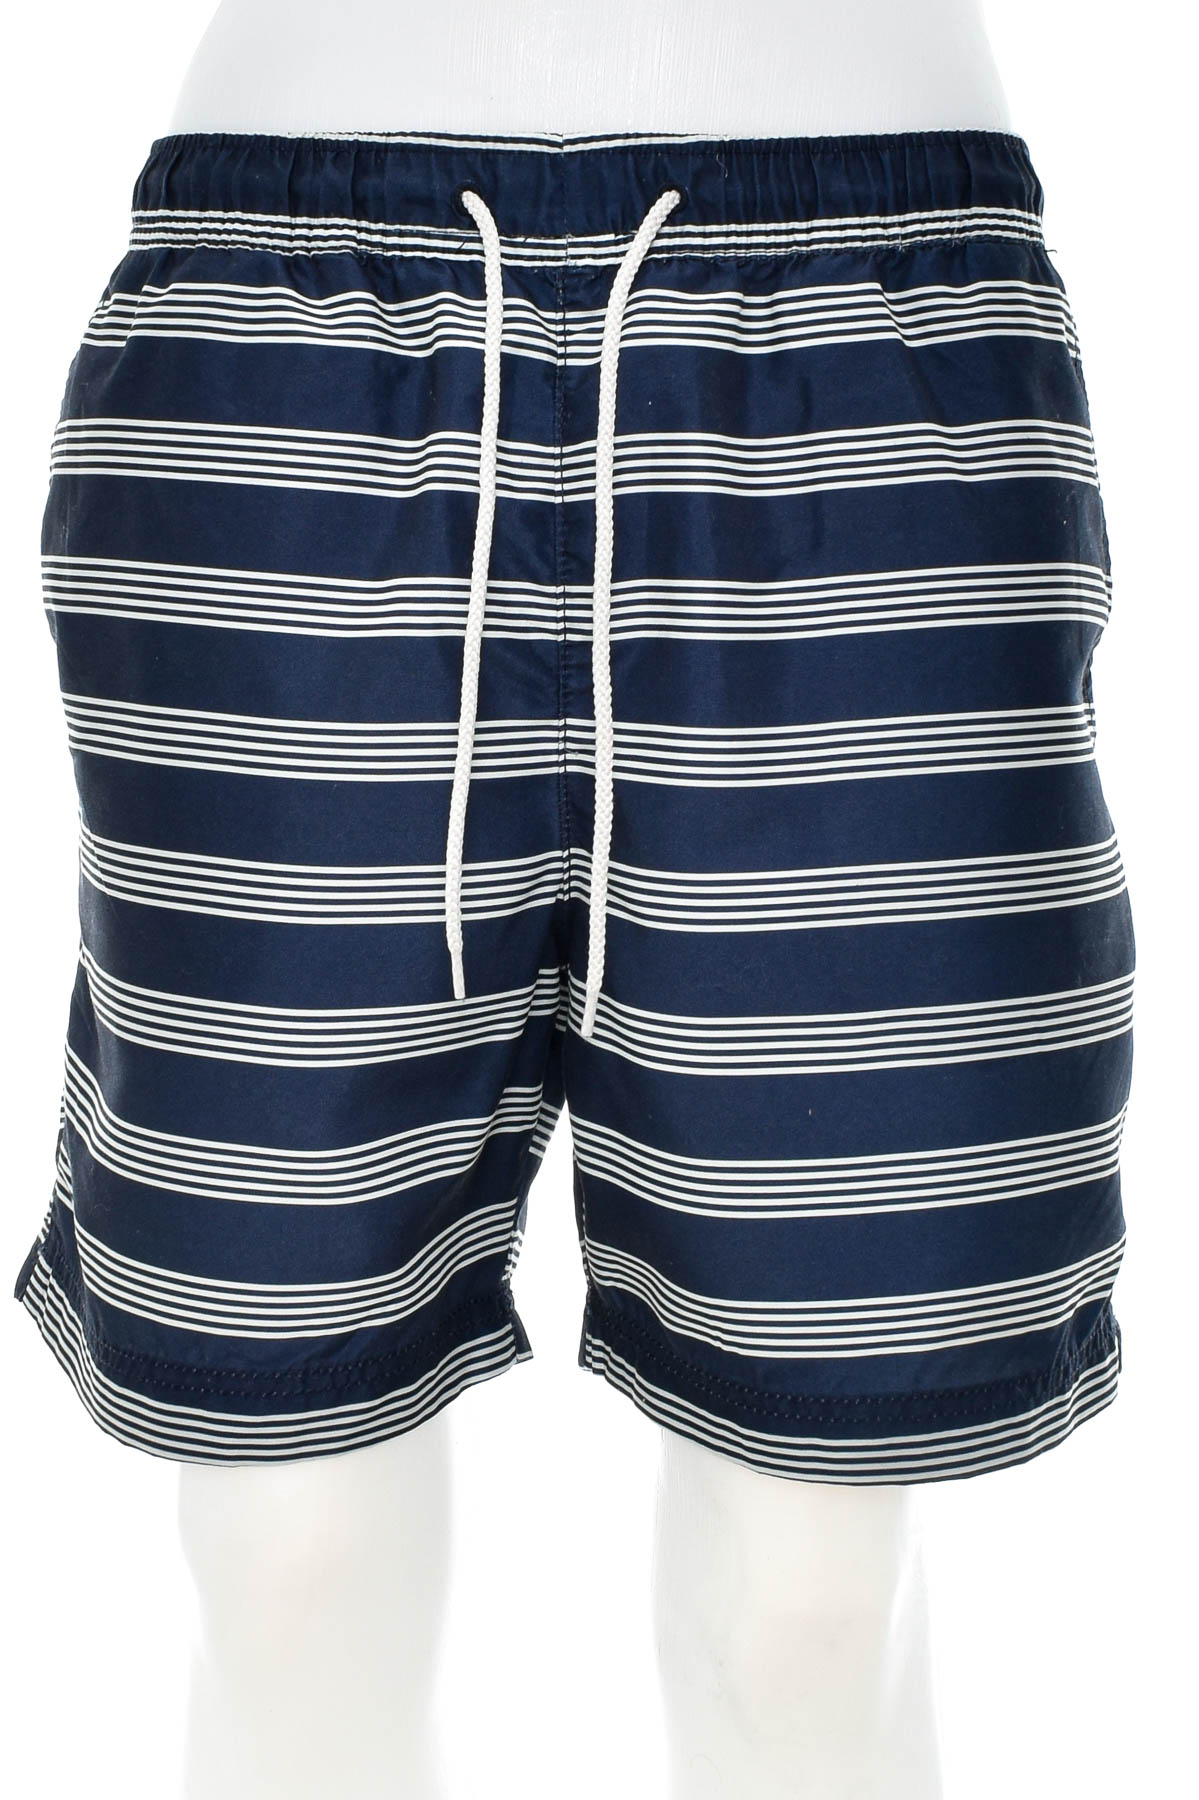 Men's shorts - SELECTED / HOMME - 0